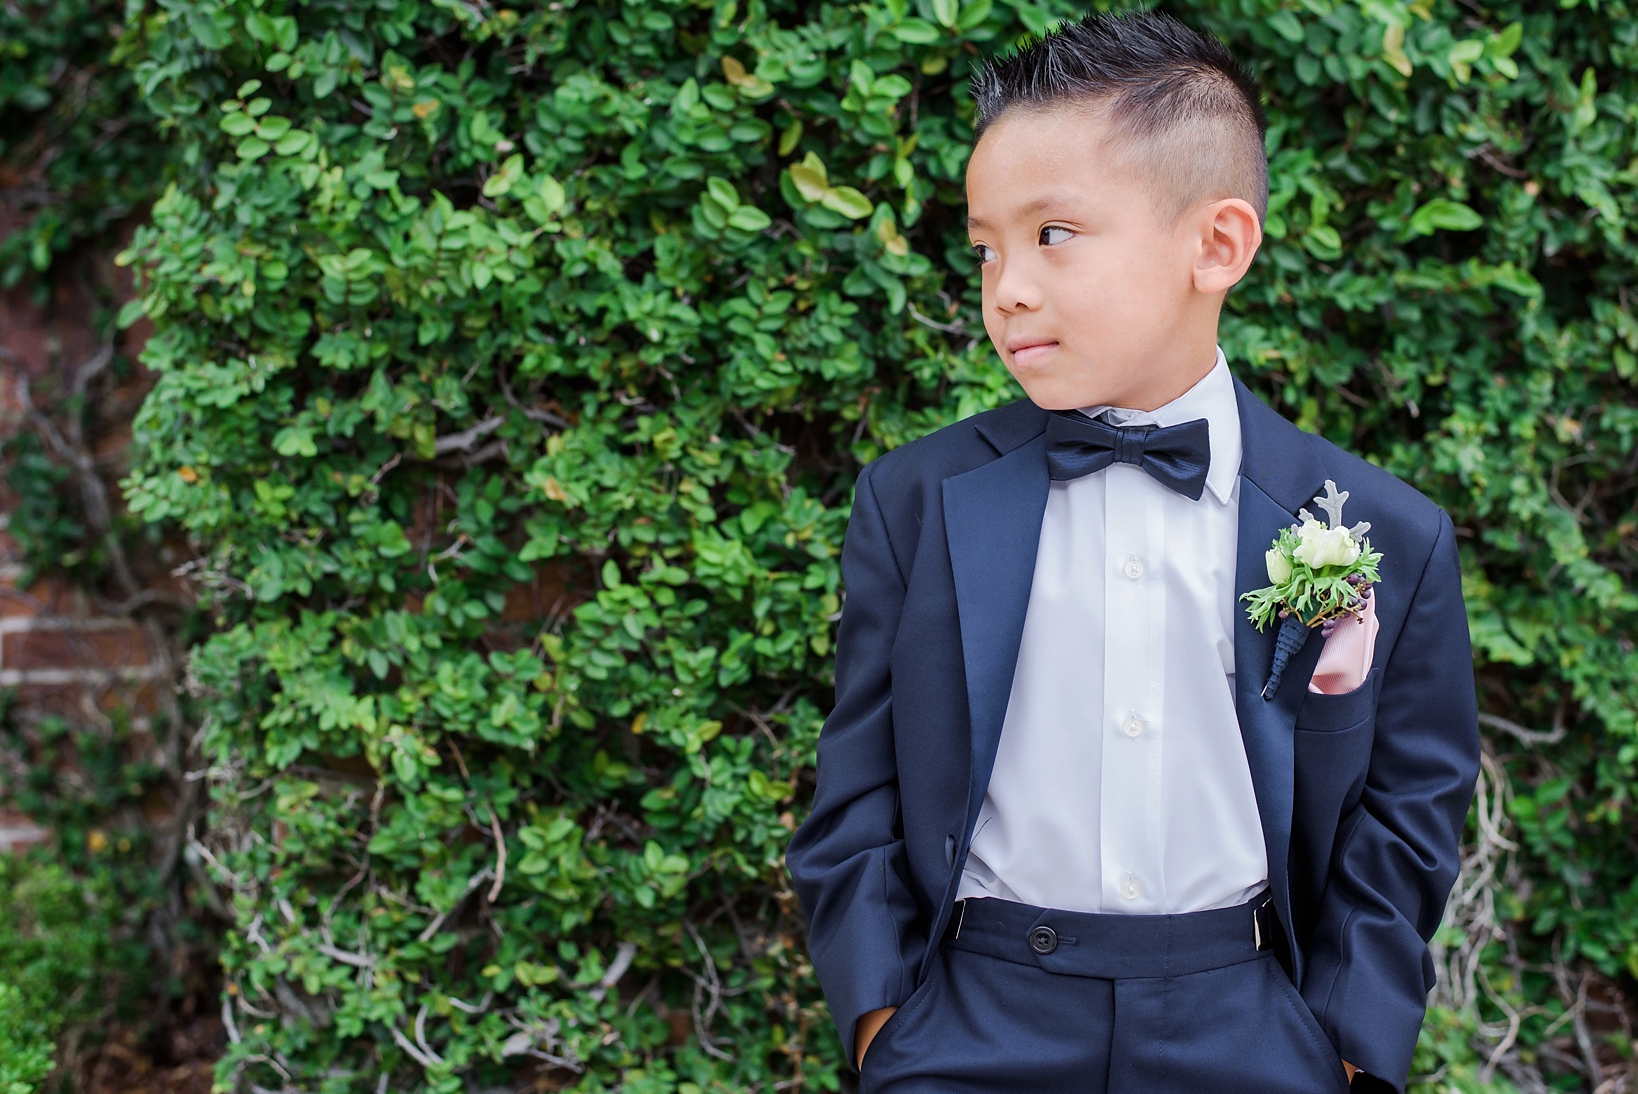 The Ring-bearer at a wedding by Sarah & Ben Photography Tampa, FL